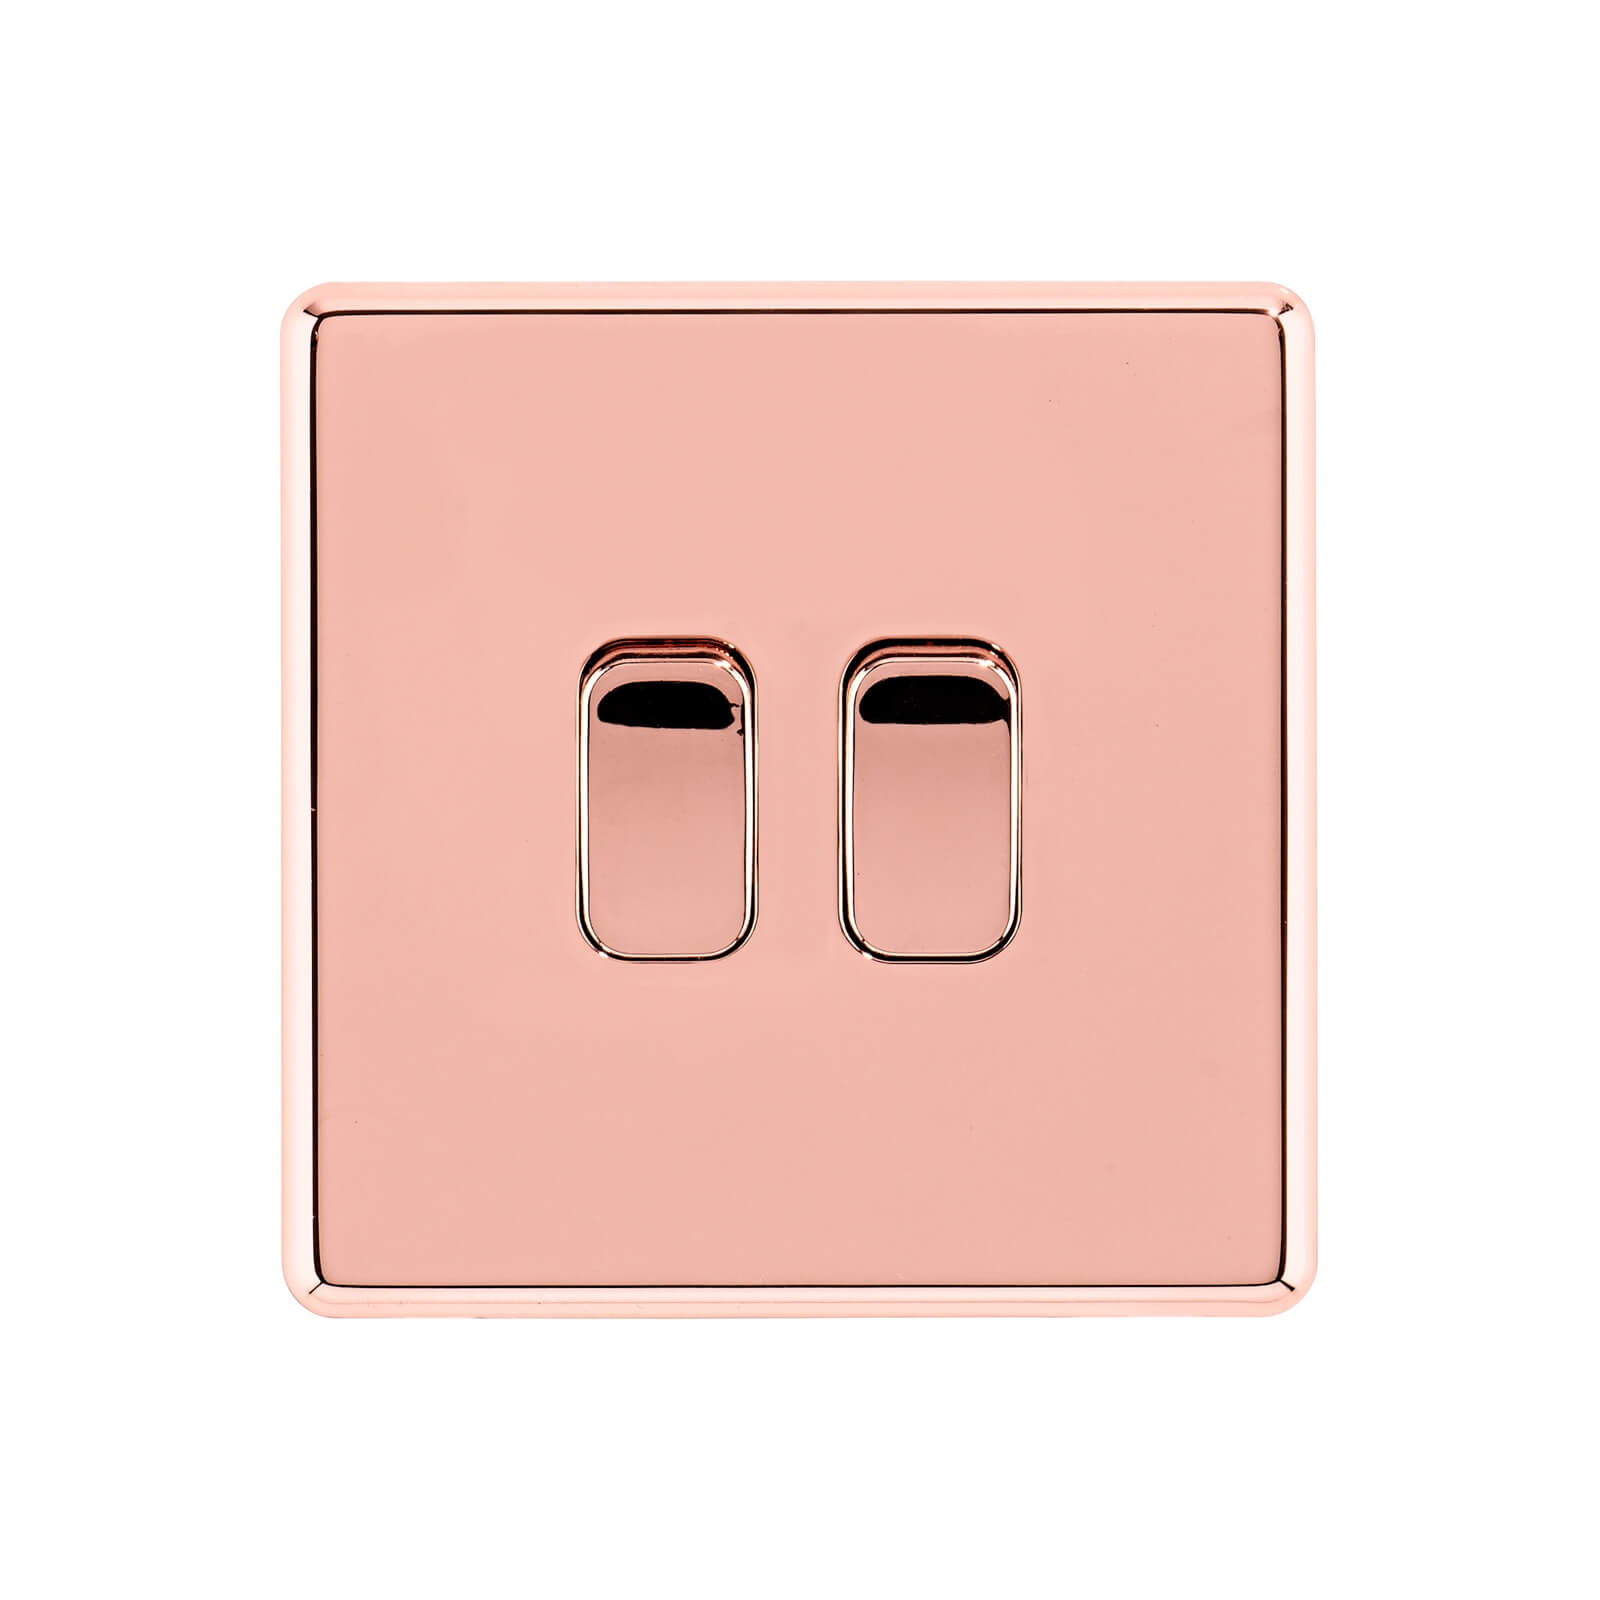 Arlec Fusion 10A 2Gang 2Way Rose Gold Double light switch